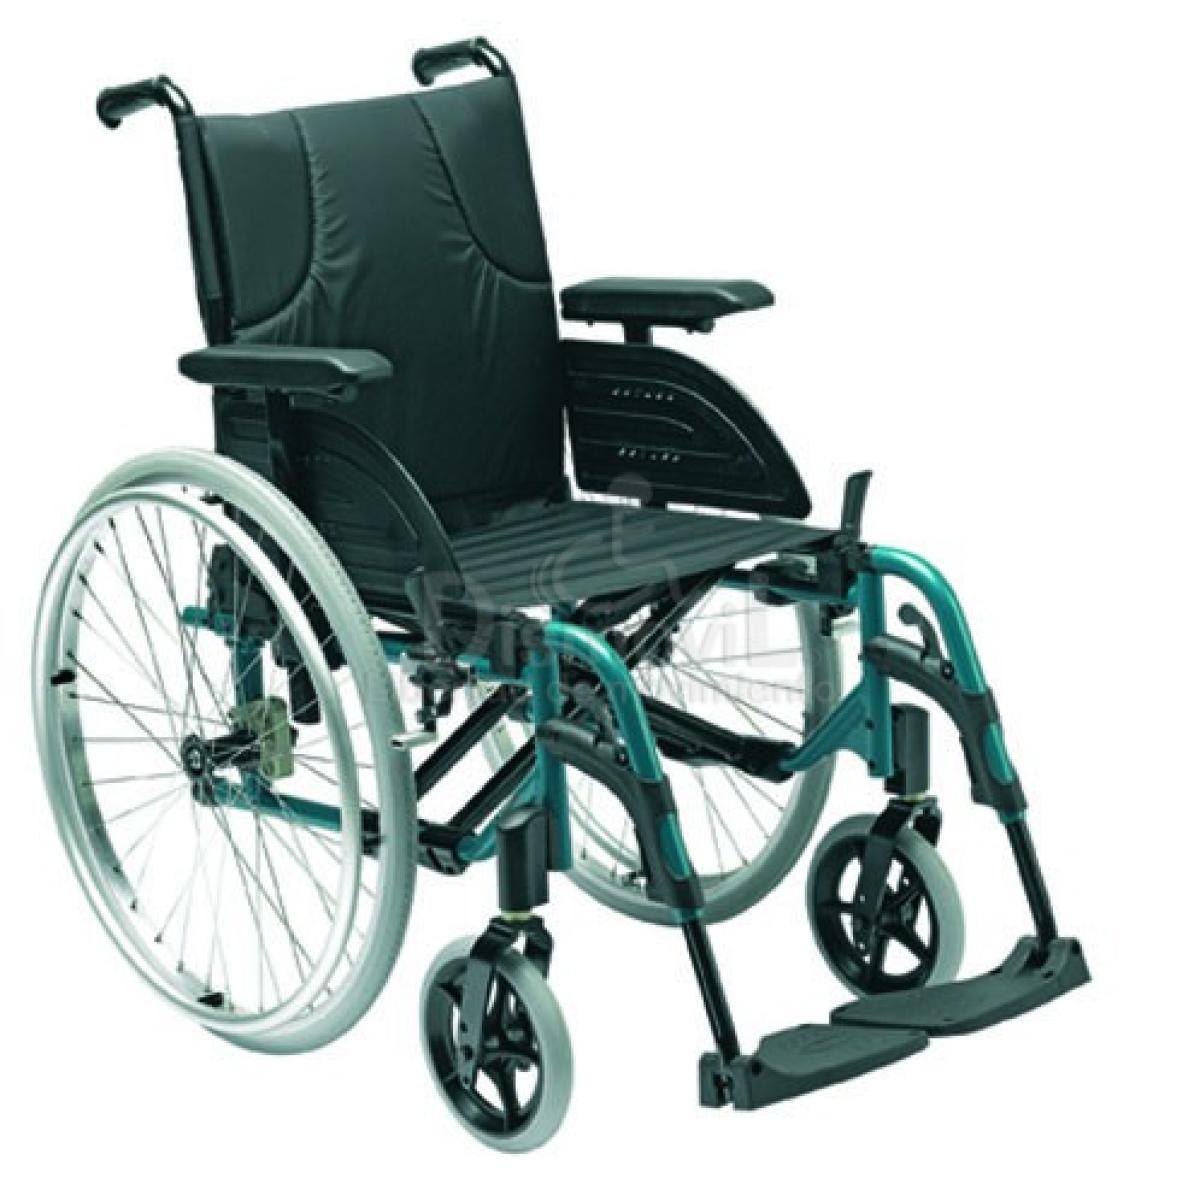 Fauteuil roulant Invacare Action 4 NG - Vimedis - Fauteuil roulant